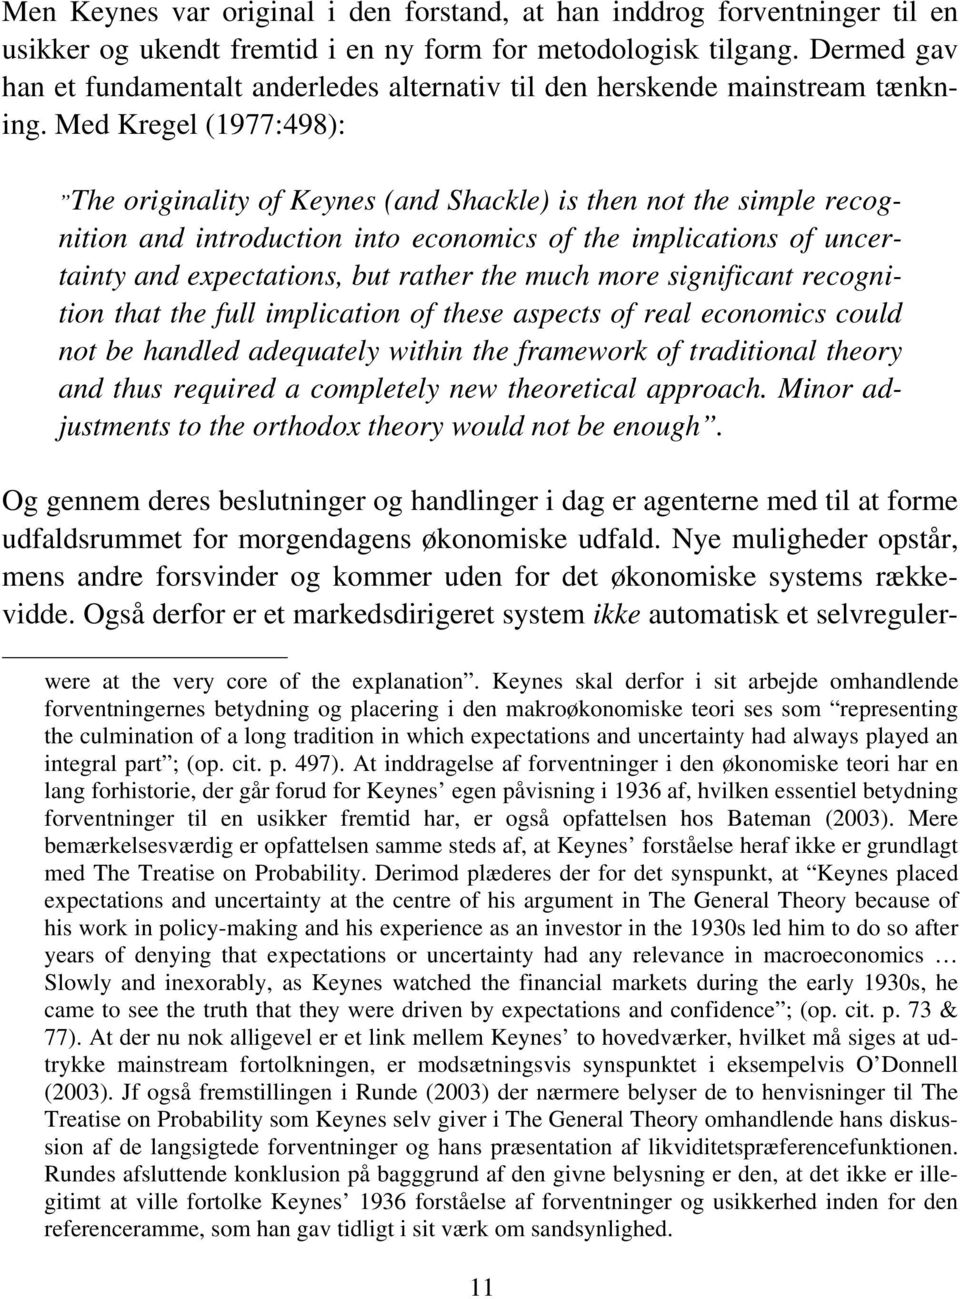 Med Kregel (1977:498): The originality of Keynes (and Shackle) is then not the simple recognition and introduction into economics of the implications of uncertainty and expectations, but rather the